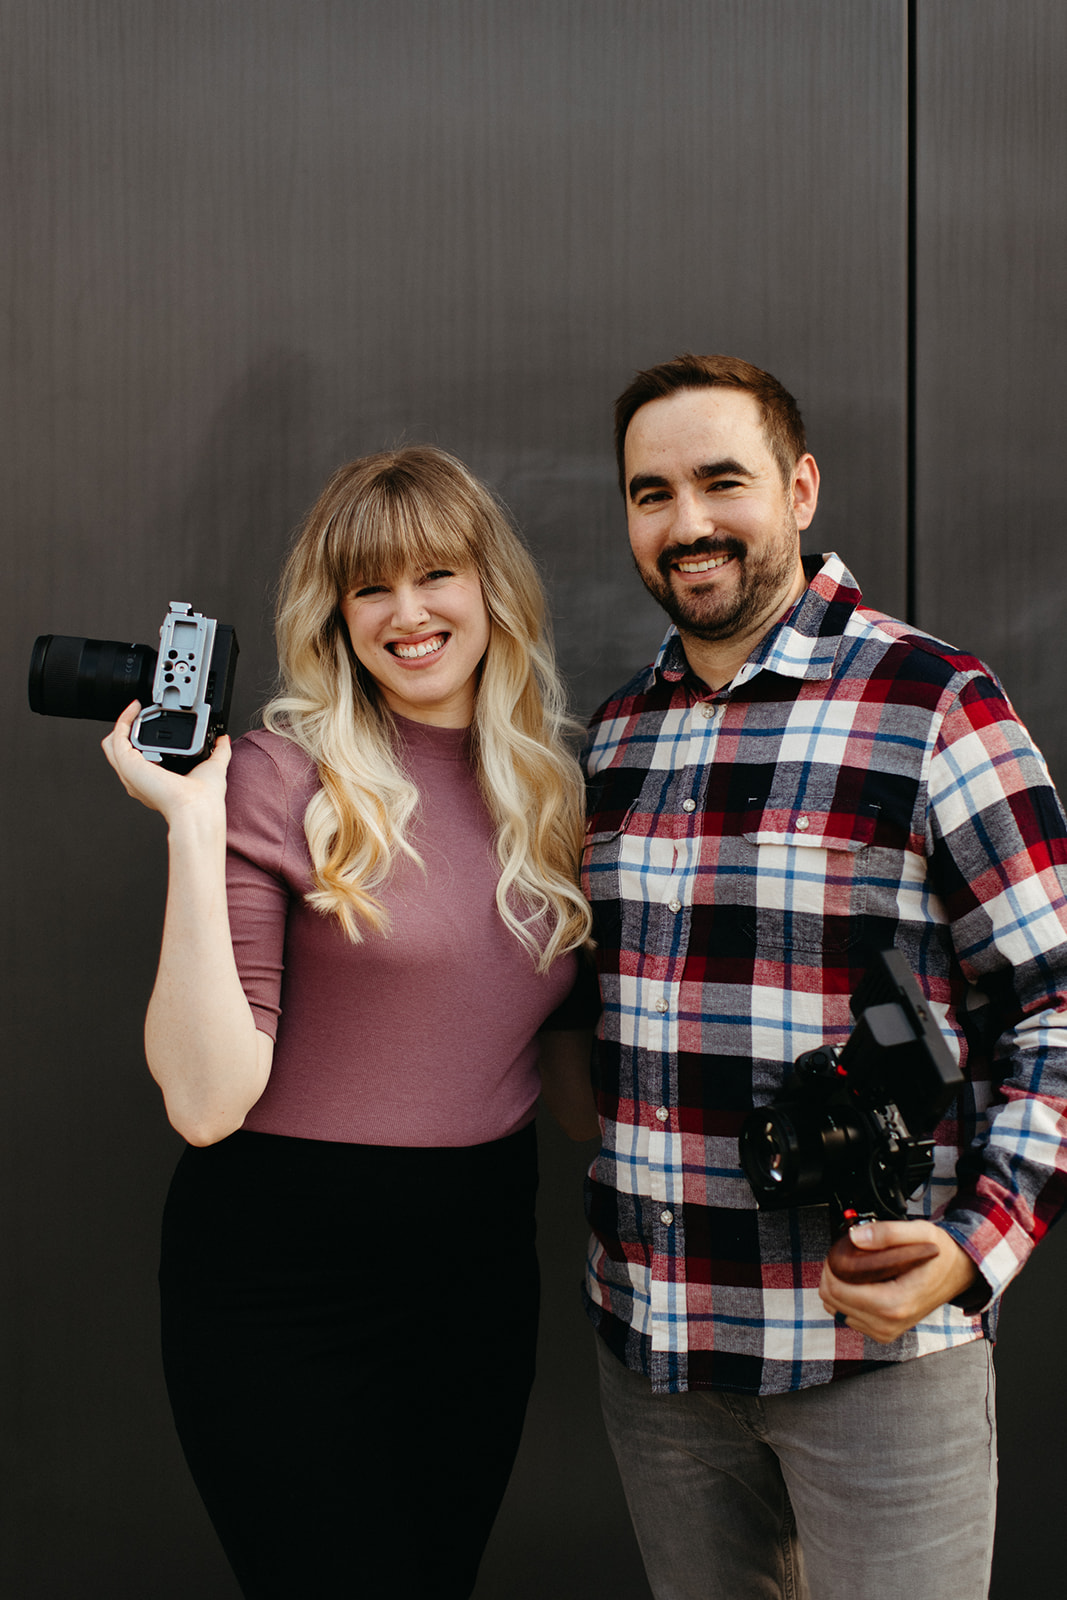 Aaron and Deborah of Masterson media with their Camera Gear